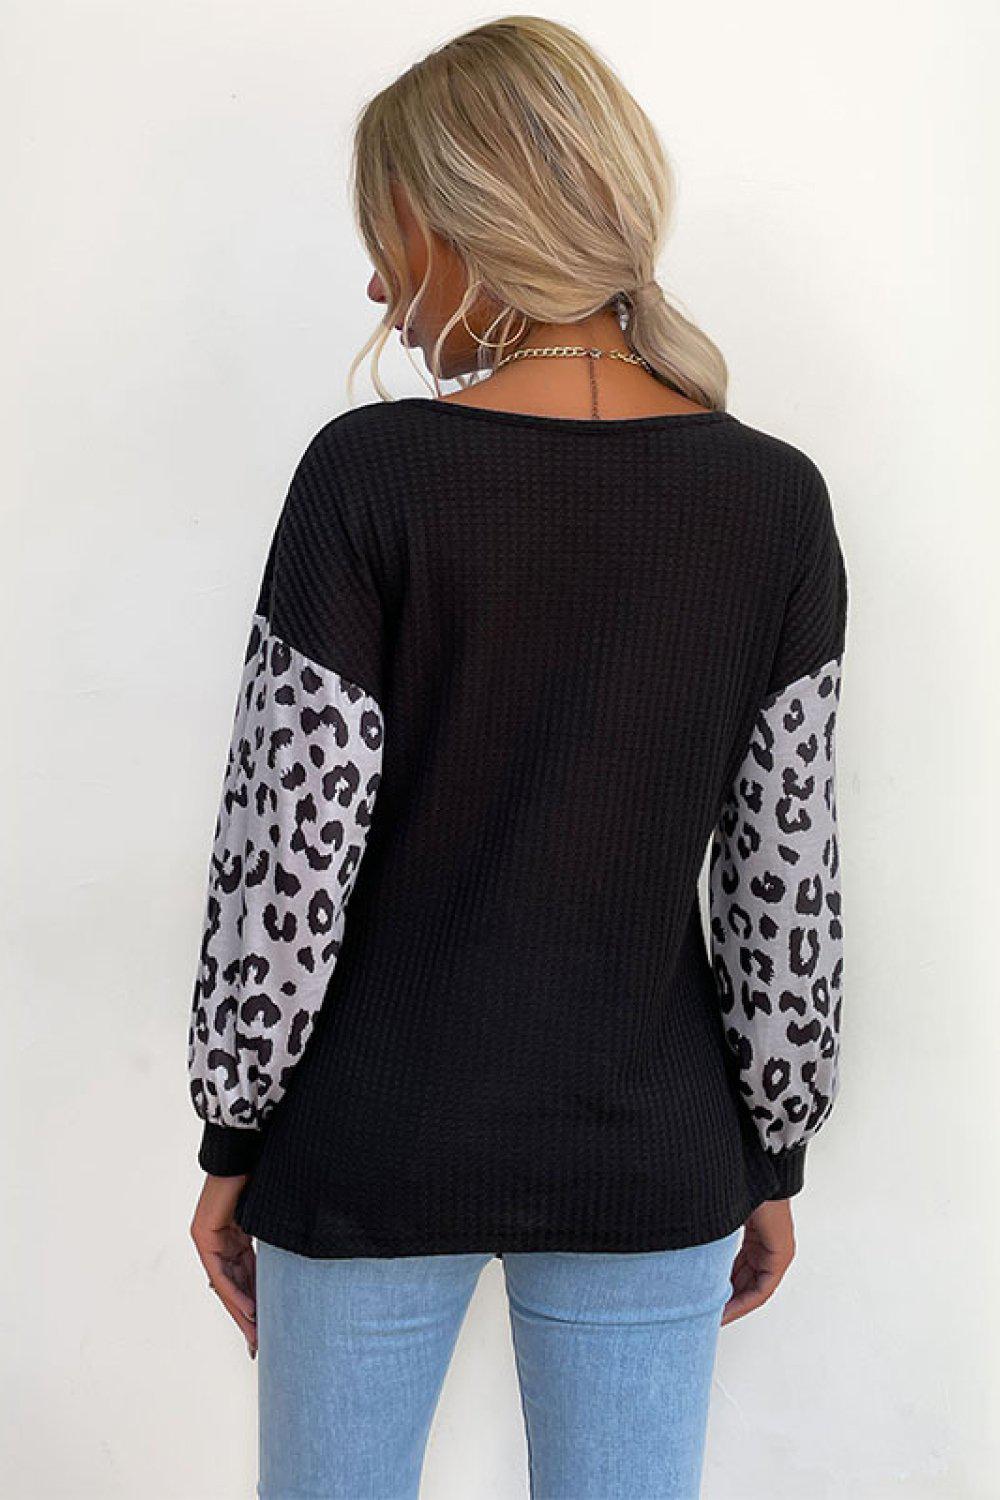 Leopard Print Sleeve Tie Front Top BLUE ZONE PLANET